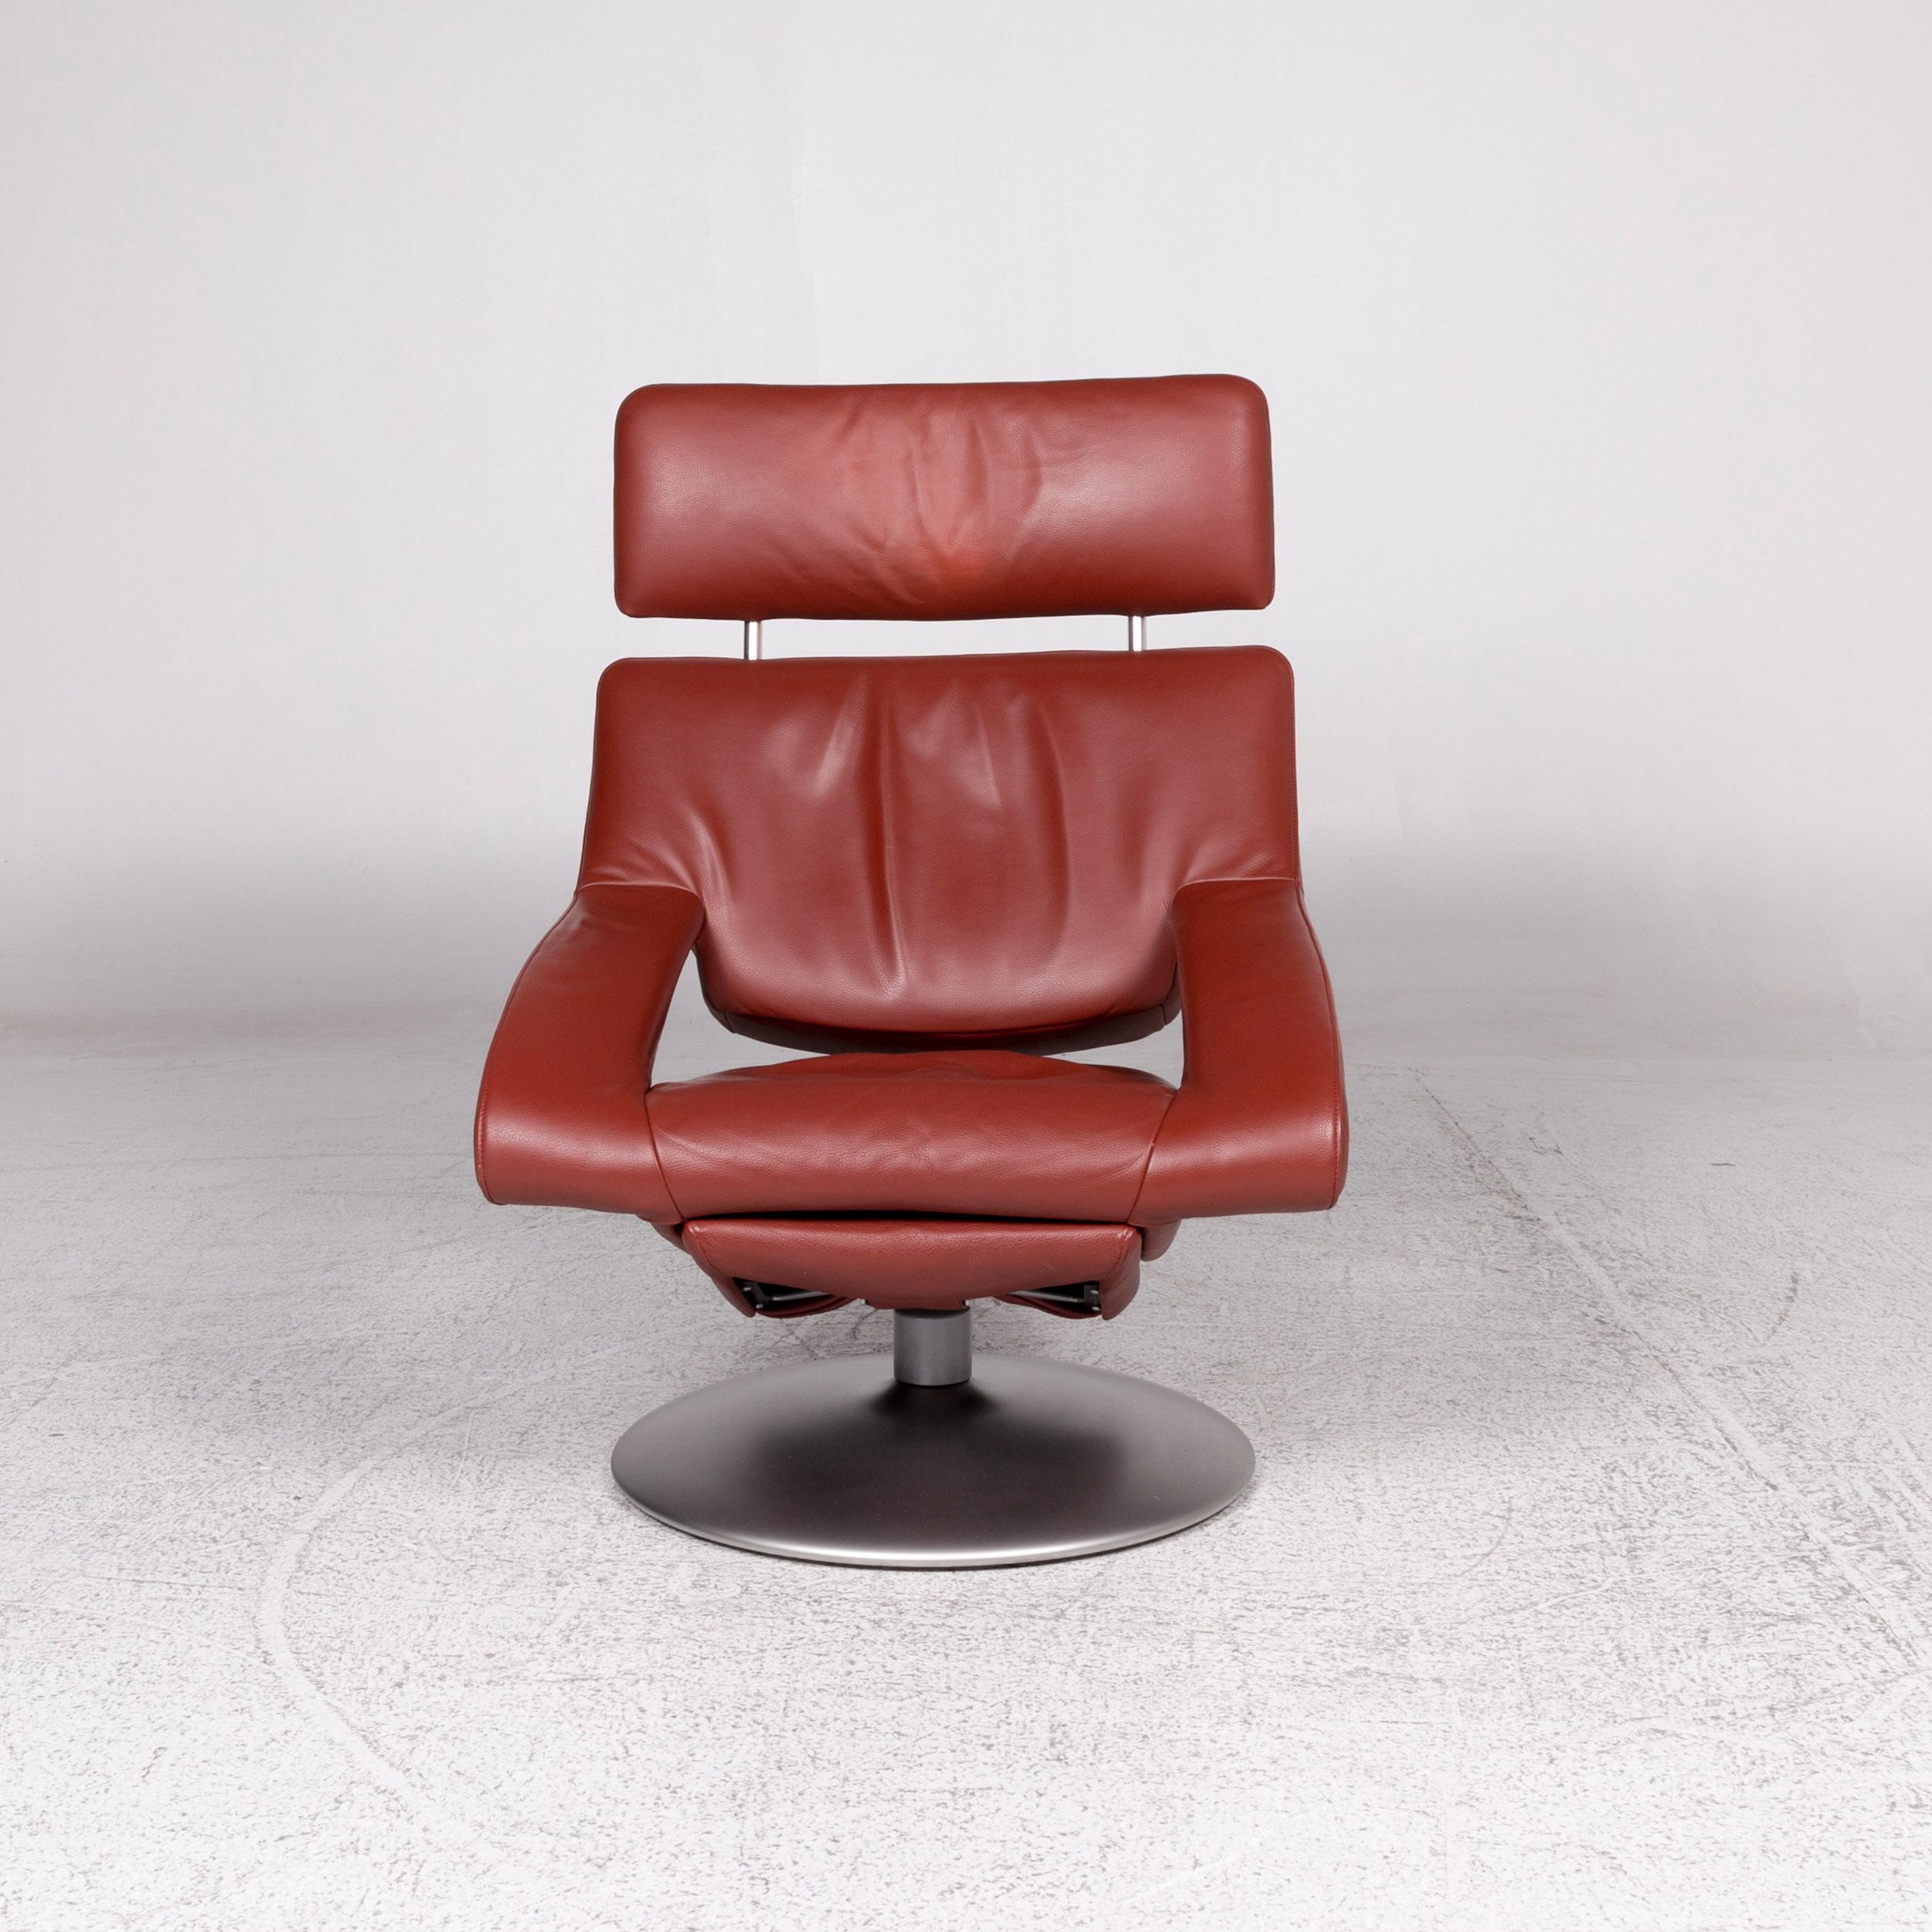 We bring to you a De Sede ds 255 leather armchair set red incl. function.

Product measurements in centimetres:

Depth 90
Width 79
Height 112
Seat-height 45
Rest-height 55
Seat-depth 58
Seat-width 51
Back-height 71.
     
  